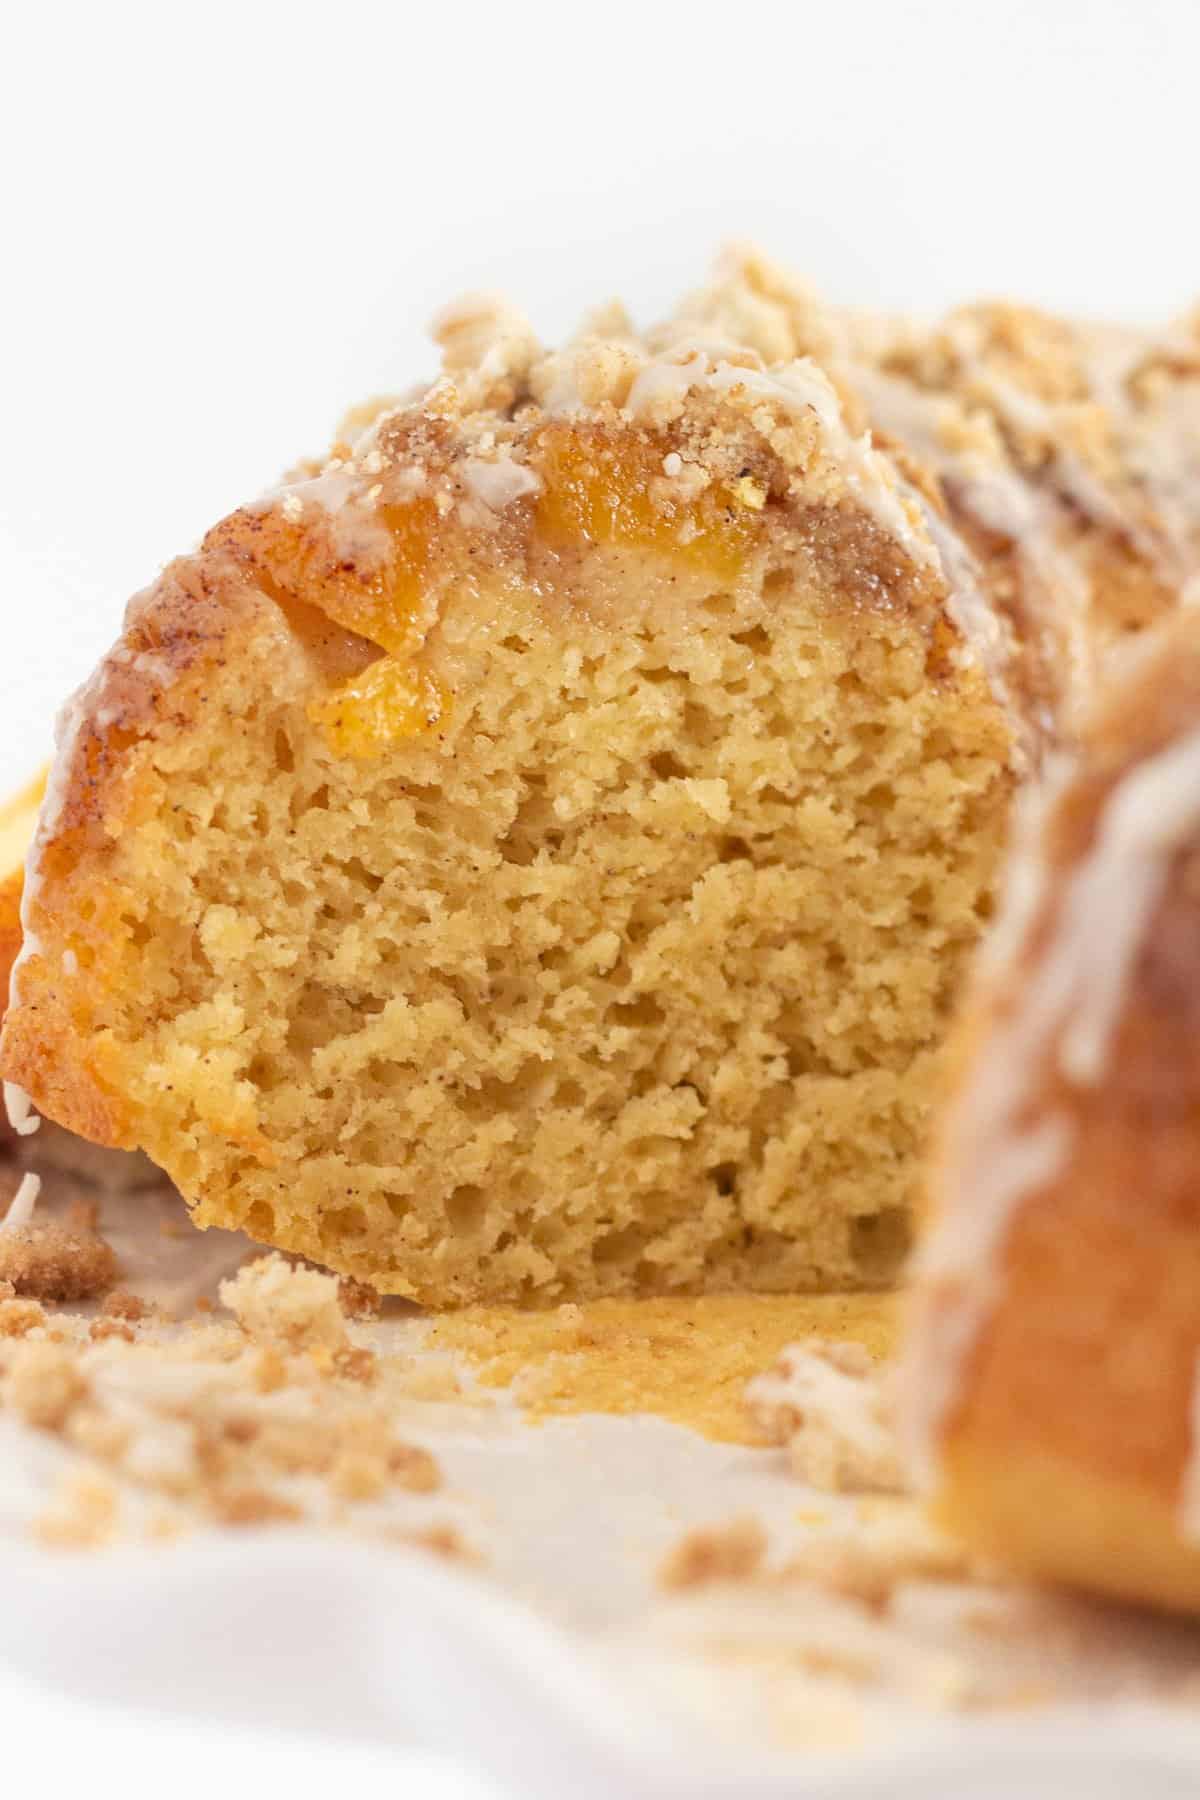 A look inside a peach cobbler bundt cake with peaches and crumb topping.